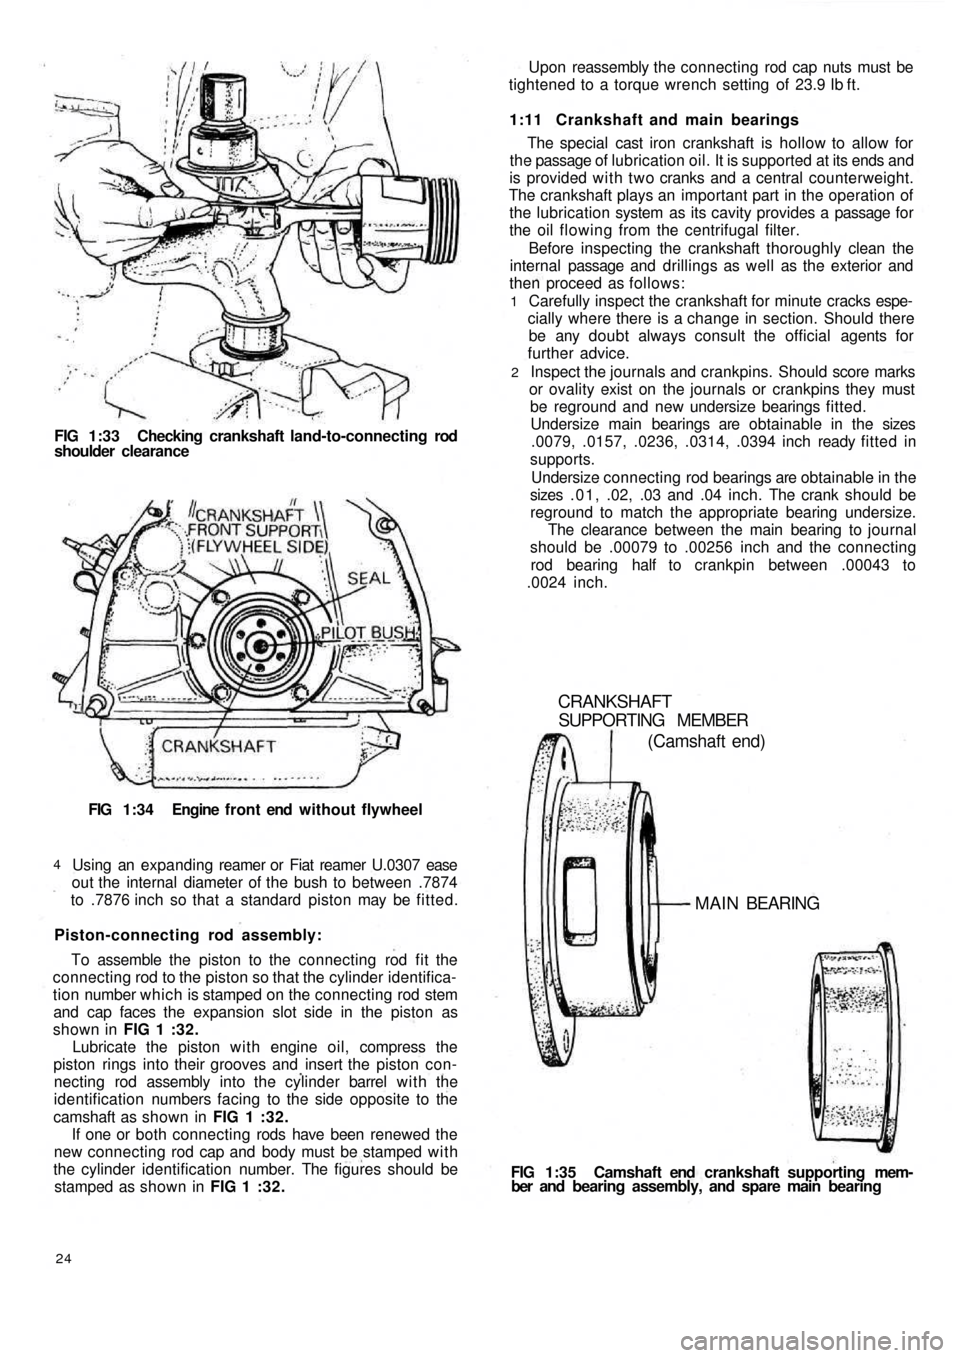 FIAT 500 1970 1.G Workshop Manual FIG 1:33 Checking crankshaft land-to-connecting rod
shoulder clearance
FIG 1:34 Engine  f r o n t  end  without flywheel
Using an expanding reamer or Fiat reamer U.0307 ease
out the internal diameter 